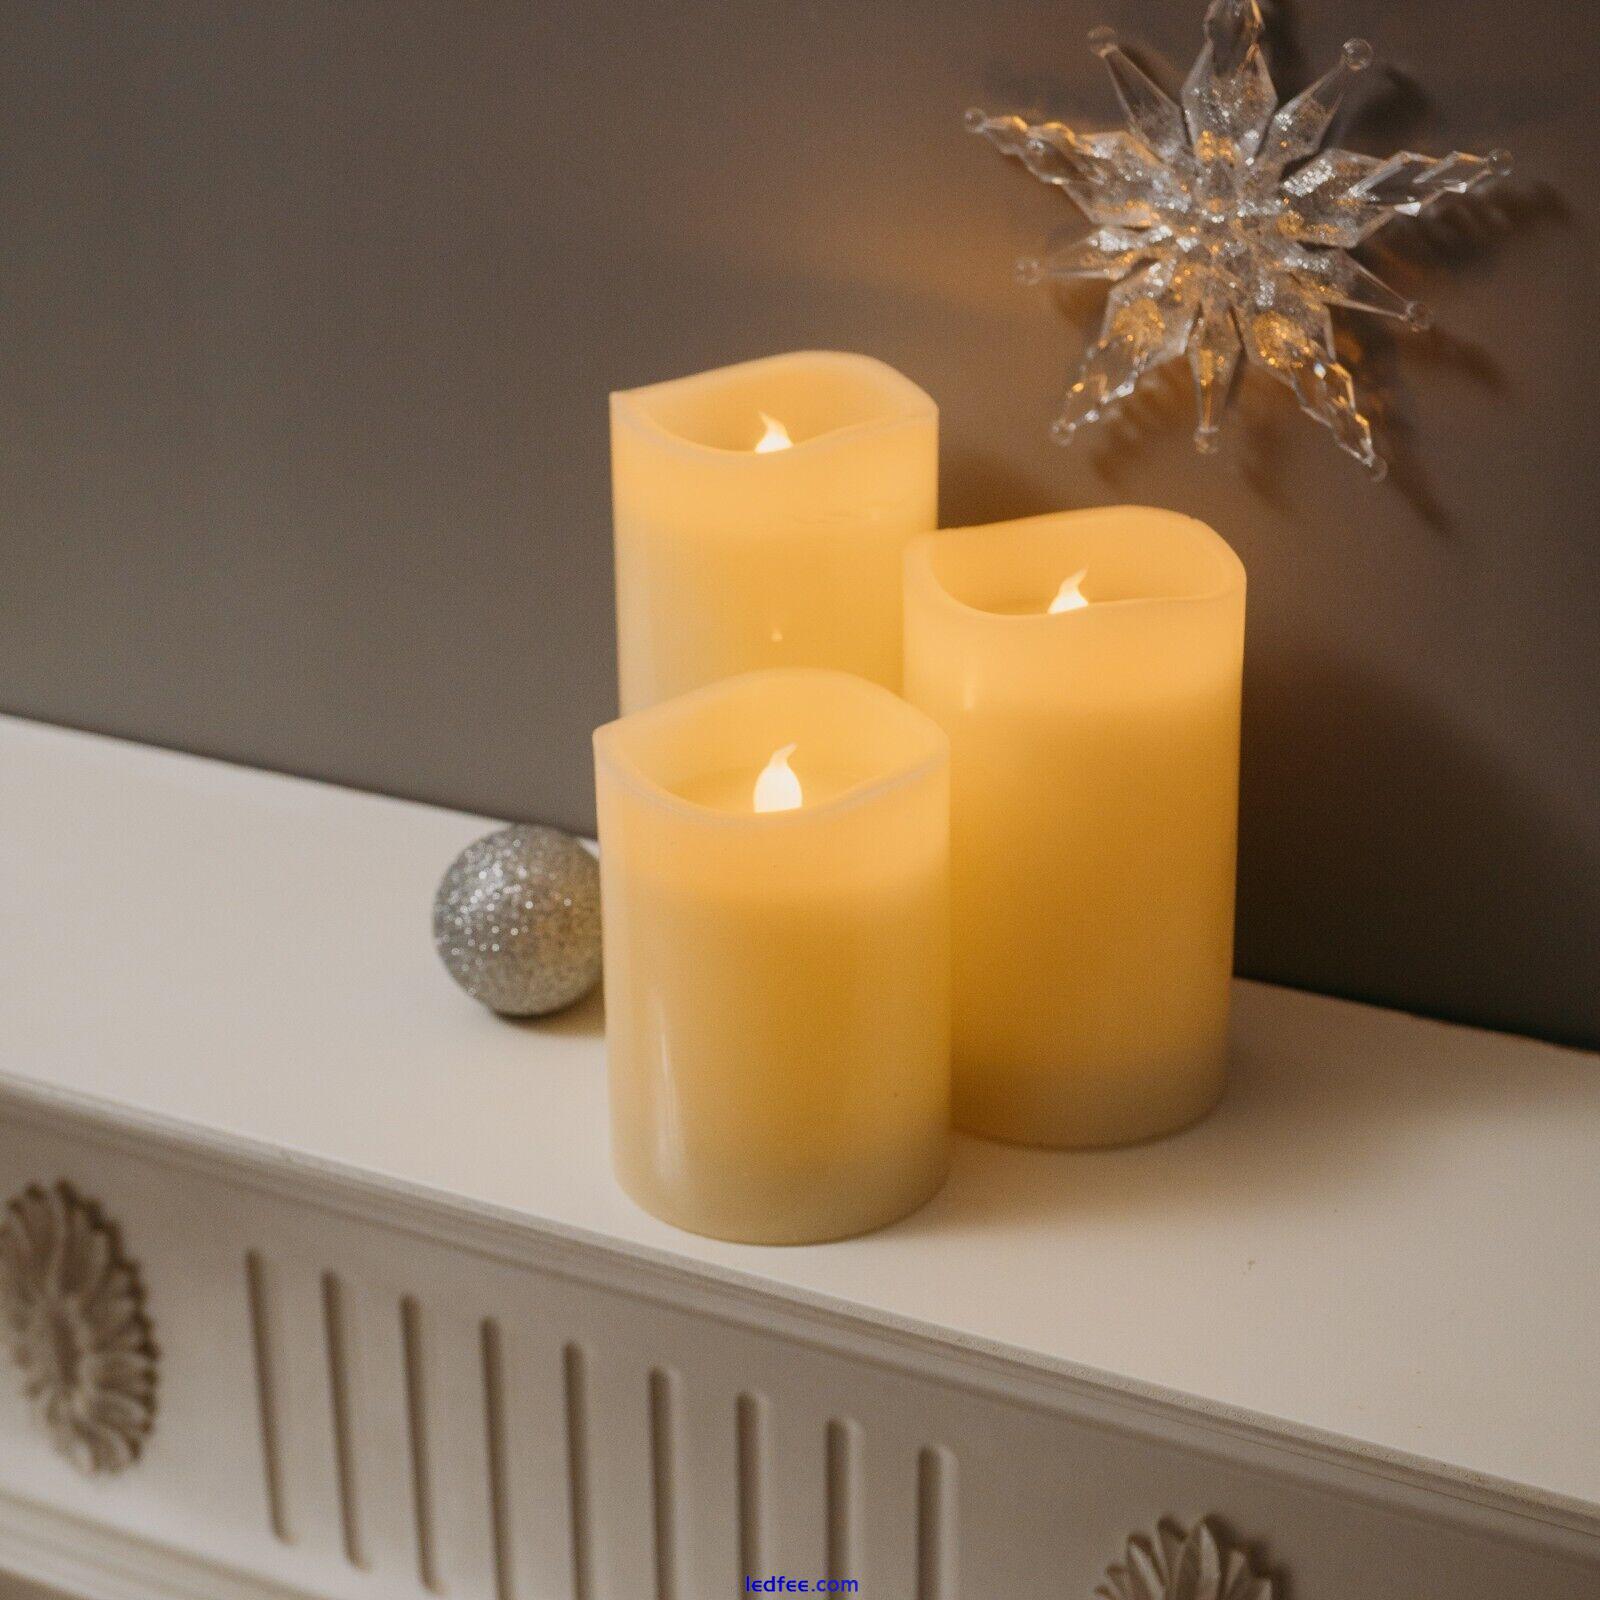 3-Piece Flameless Pillar Candle Set – Flickering LED Candles - Battery Operated 1 